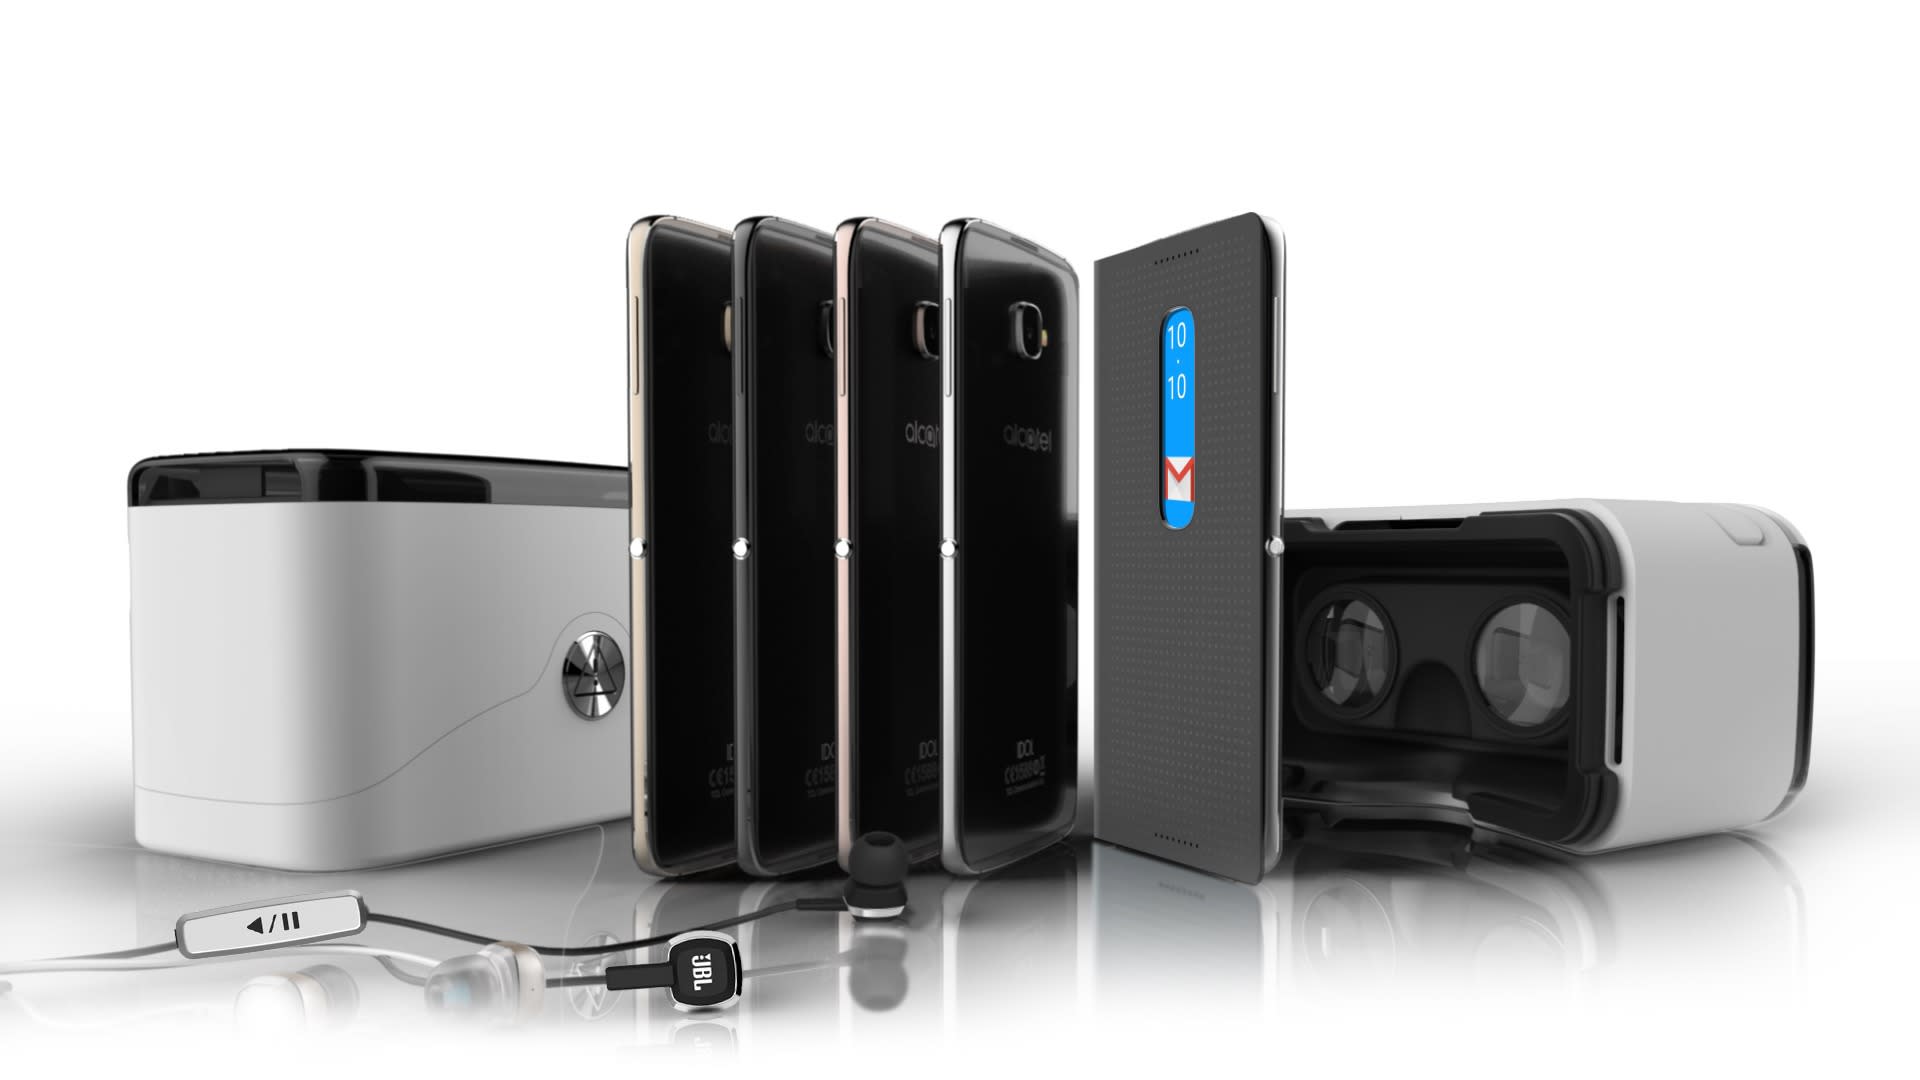 Alcatel Idol 4 Comes In A Box That Doubles As Vr Goggles